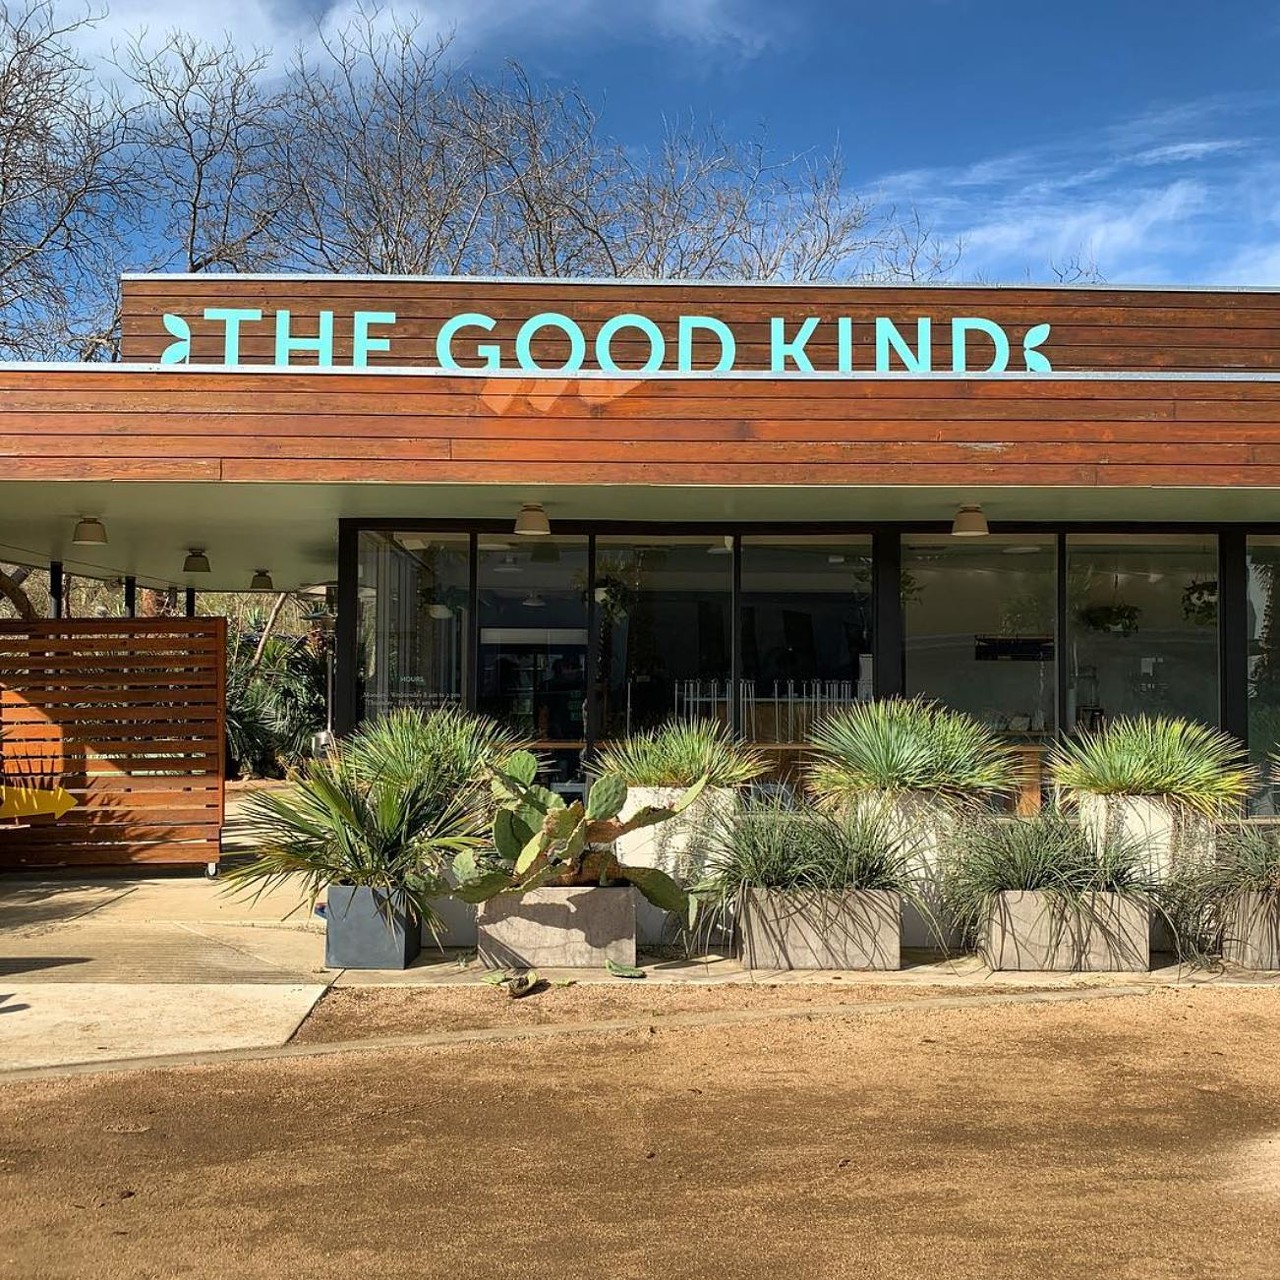 The Good Kind
1127 S St. Mary’s, eatgoodkind.com
Labeled as “fresh comfort food” and located in trendy Southtown, newly-opened The Good Kind serves both fresh favorites like salads and sandwiches and classic comfort foods like mac ‘n’ cheese. You can also find breakfast dishes as well as brunch favorites at this eatery.
Photo via Instagram / eatgoodkind